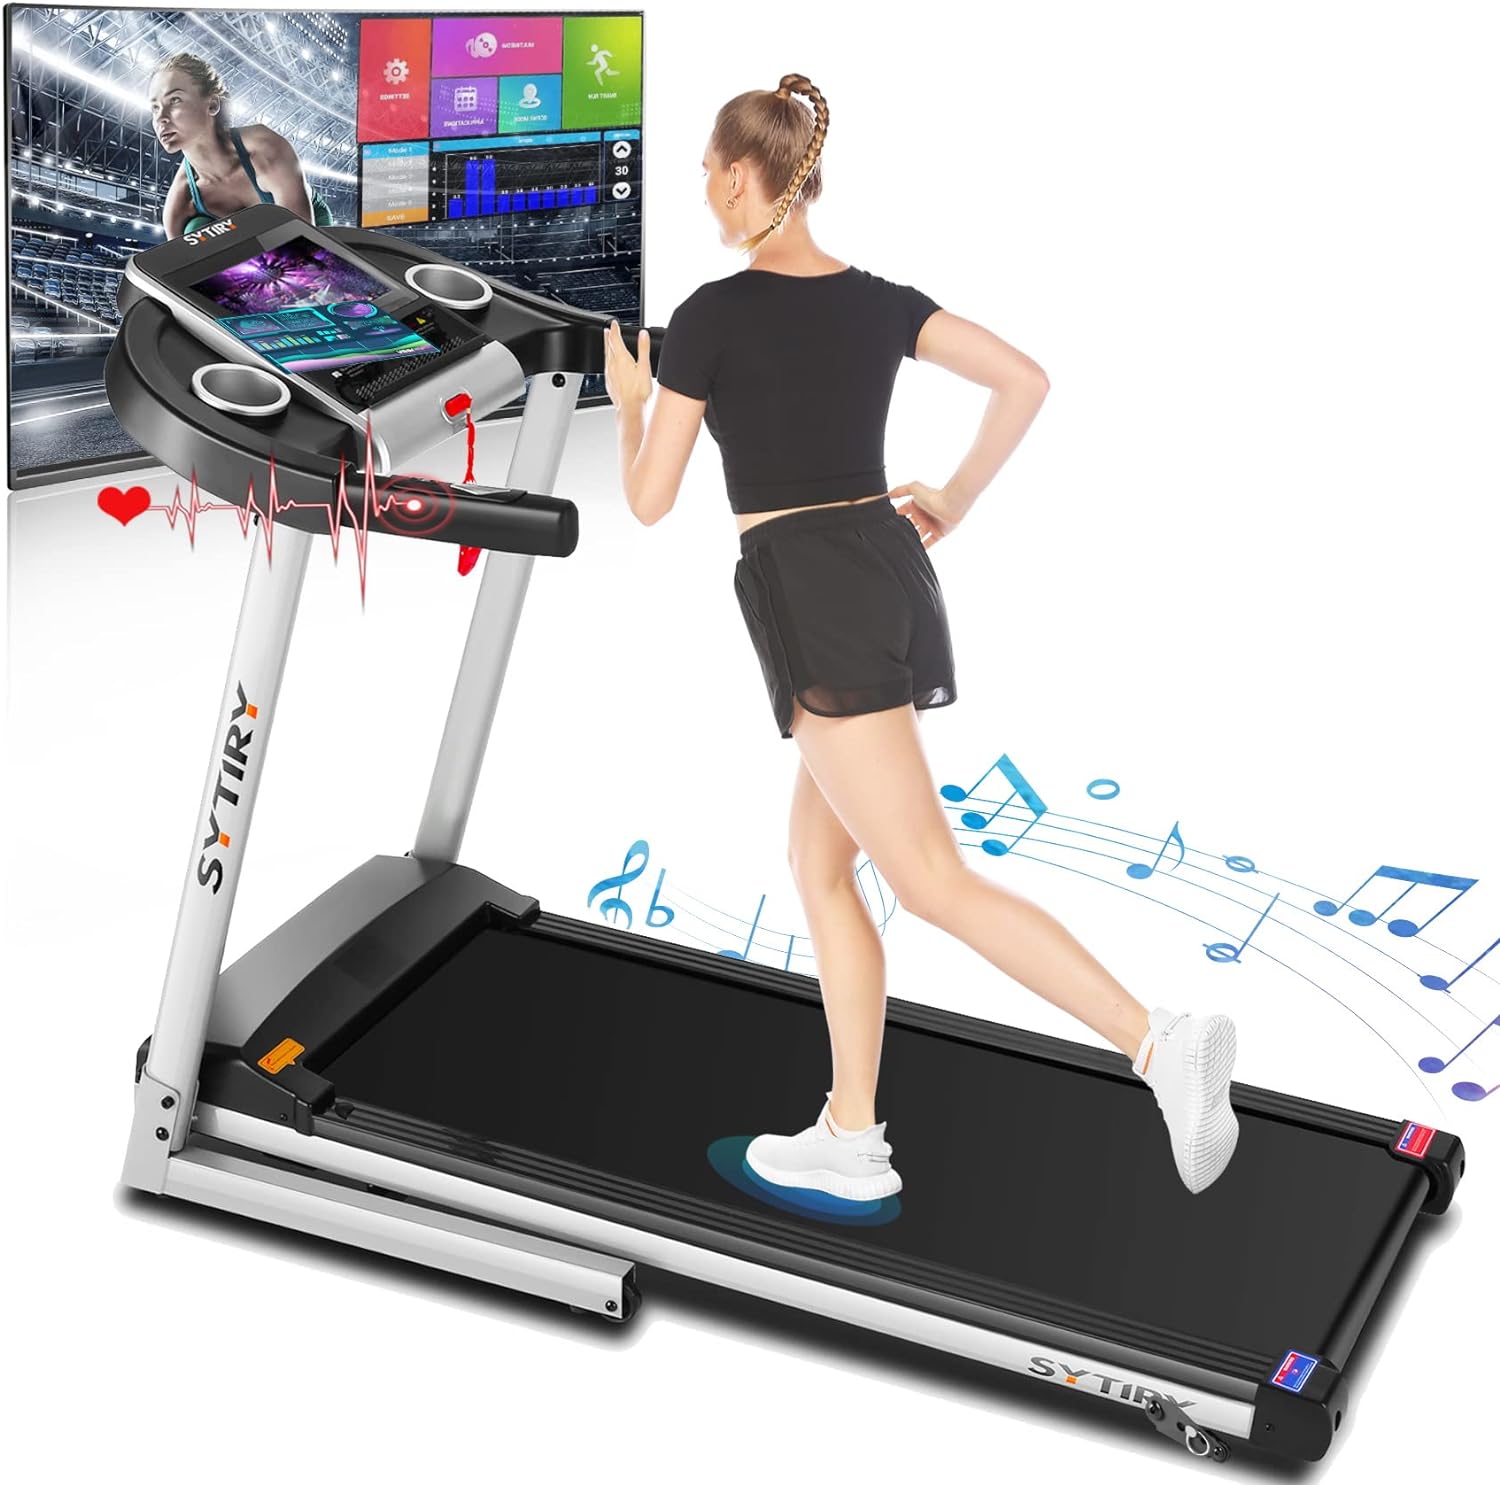 SYTIRY Treadmill with Large 10 HD TV Touchscreen,Folding 3.25HP Brushless Motorand Incline Treadmills,WiFi Connection,3D Virtual Sports Scene,YouTube,Bluetooth Speakers etc,Treadmill for Gym